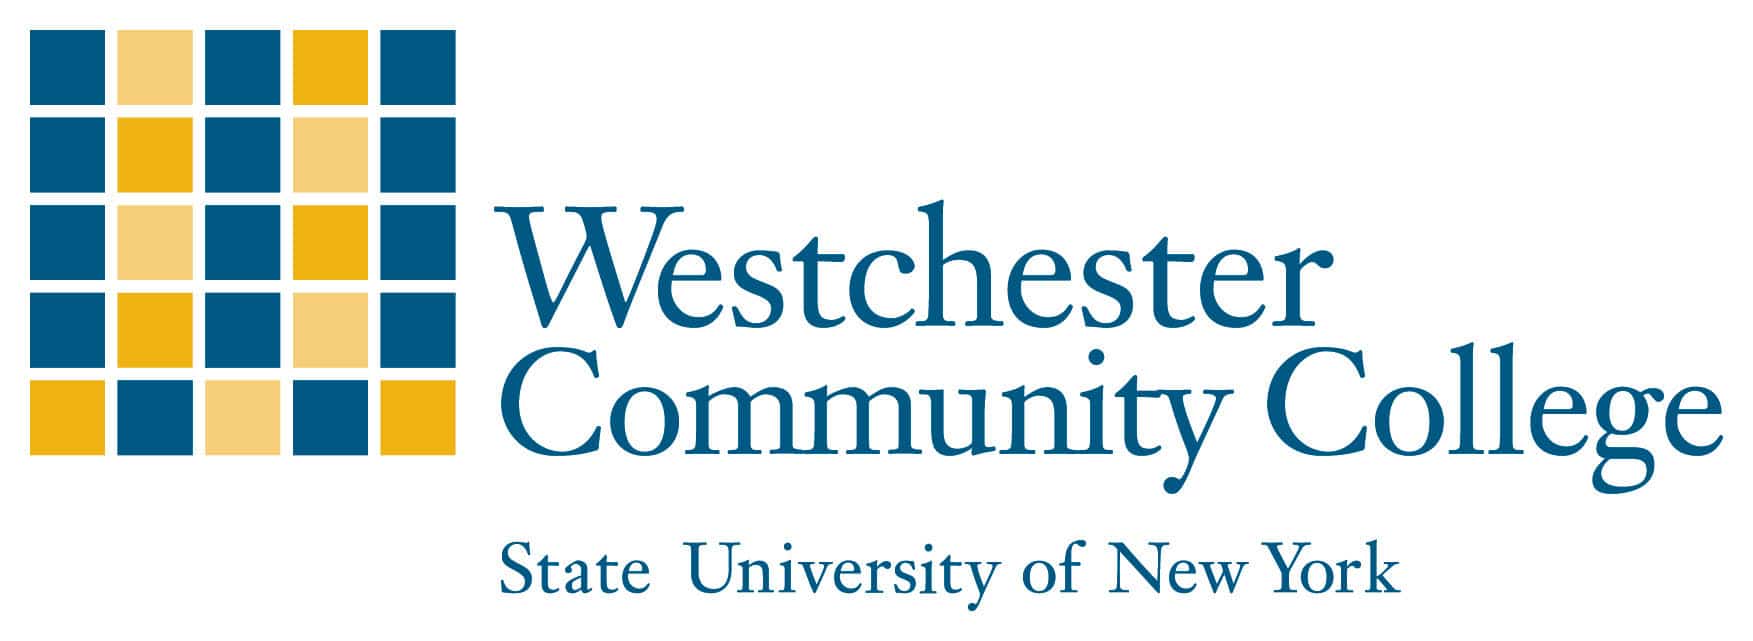 Westchester Community College (SUNY)